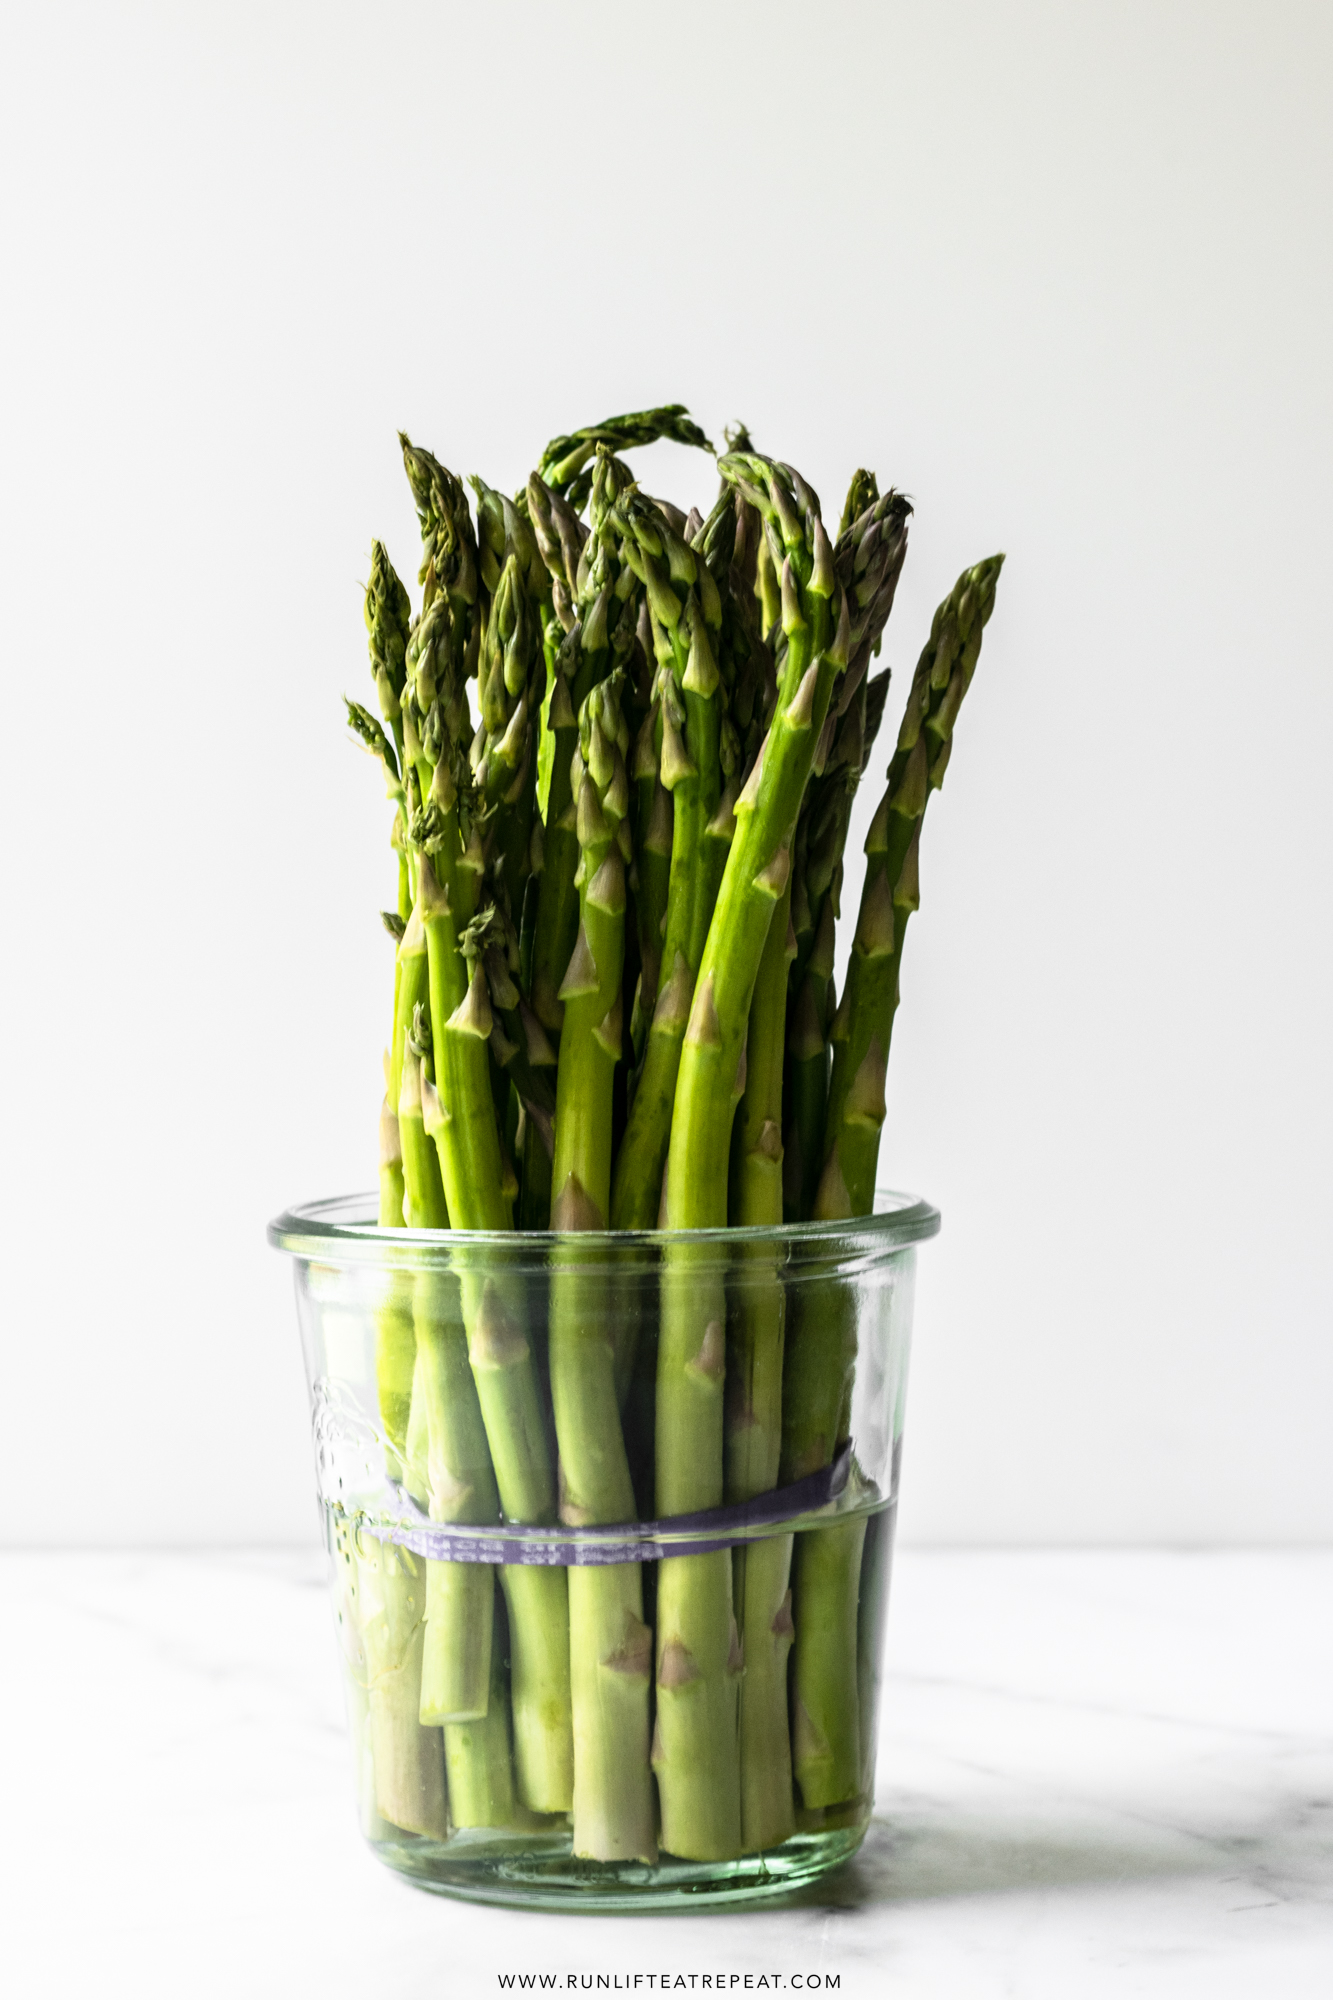 This roasted asparagus recipe is seasoned with olive oil, fresh garlic, salt, pepper, and finished with freshly squeezed lemon juice. It's a simple, flavor packed side dish that everyone will love and it's on the table in just 20 minutes!